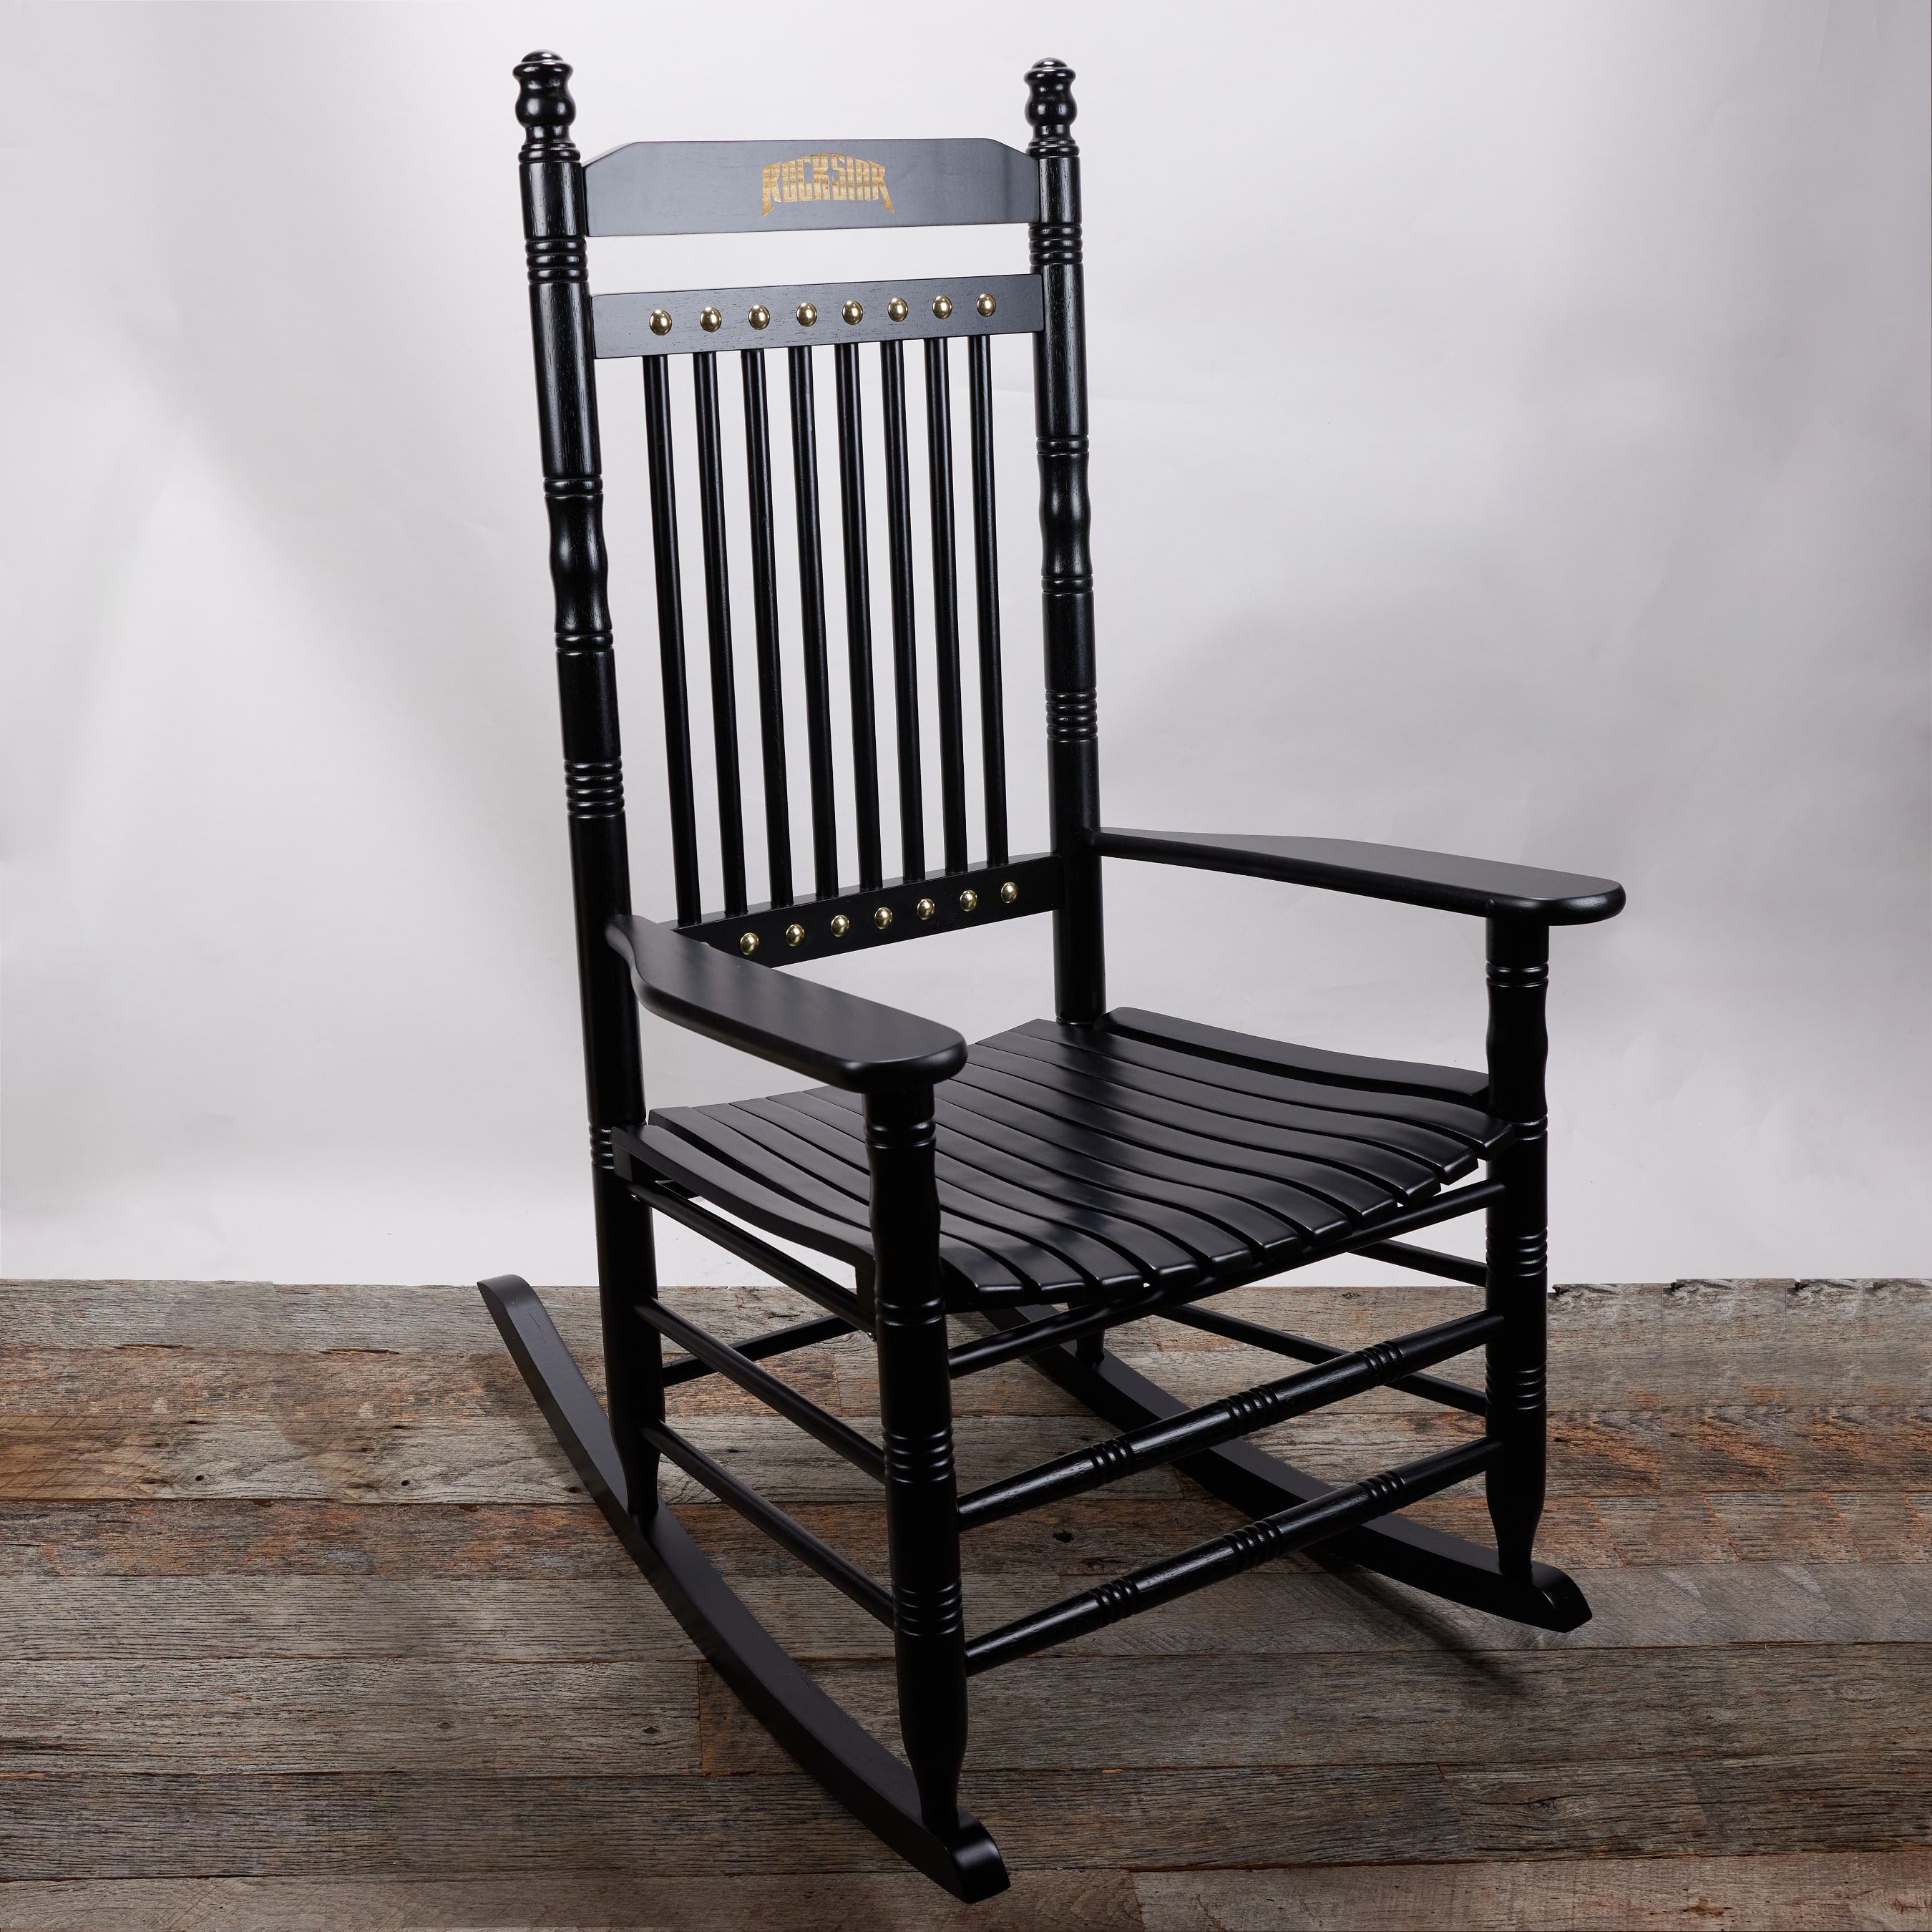 The limited-edition rocking chairs will be showcased on Cracker Barrel front porches nationwide for guests to experience firsthand just how rockin’ they are.